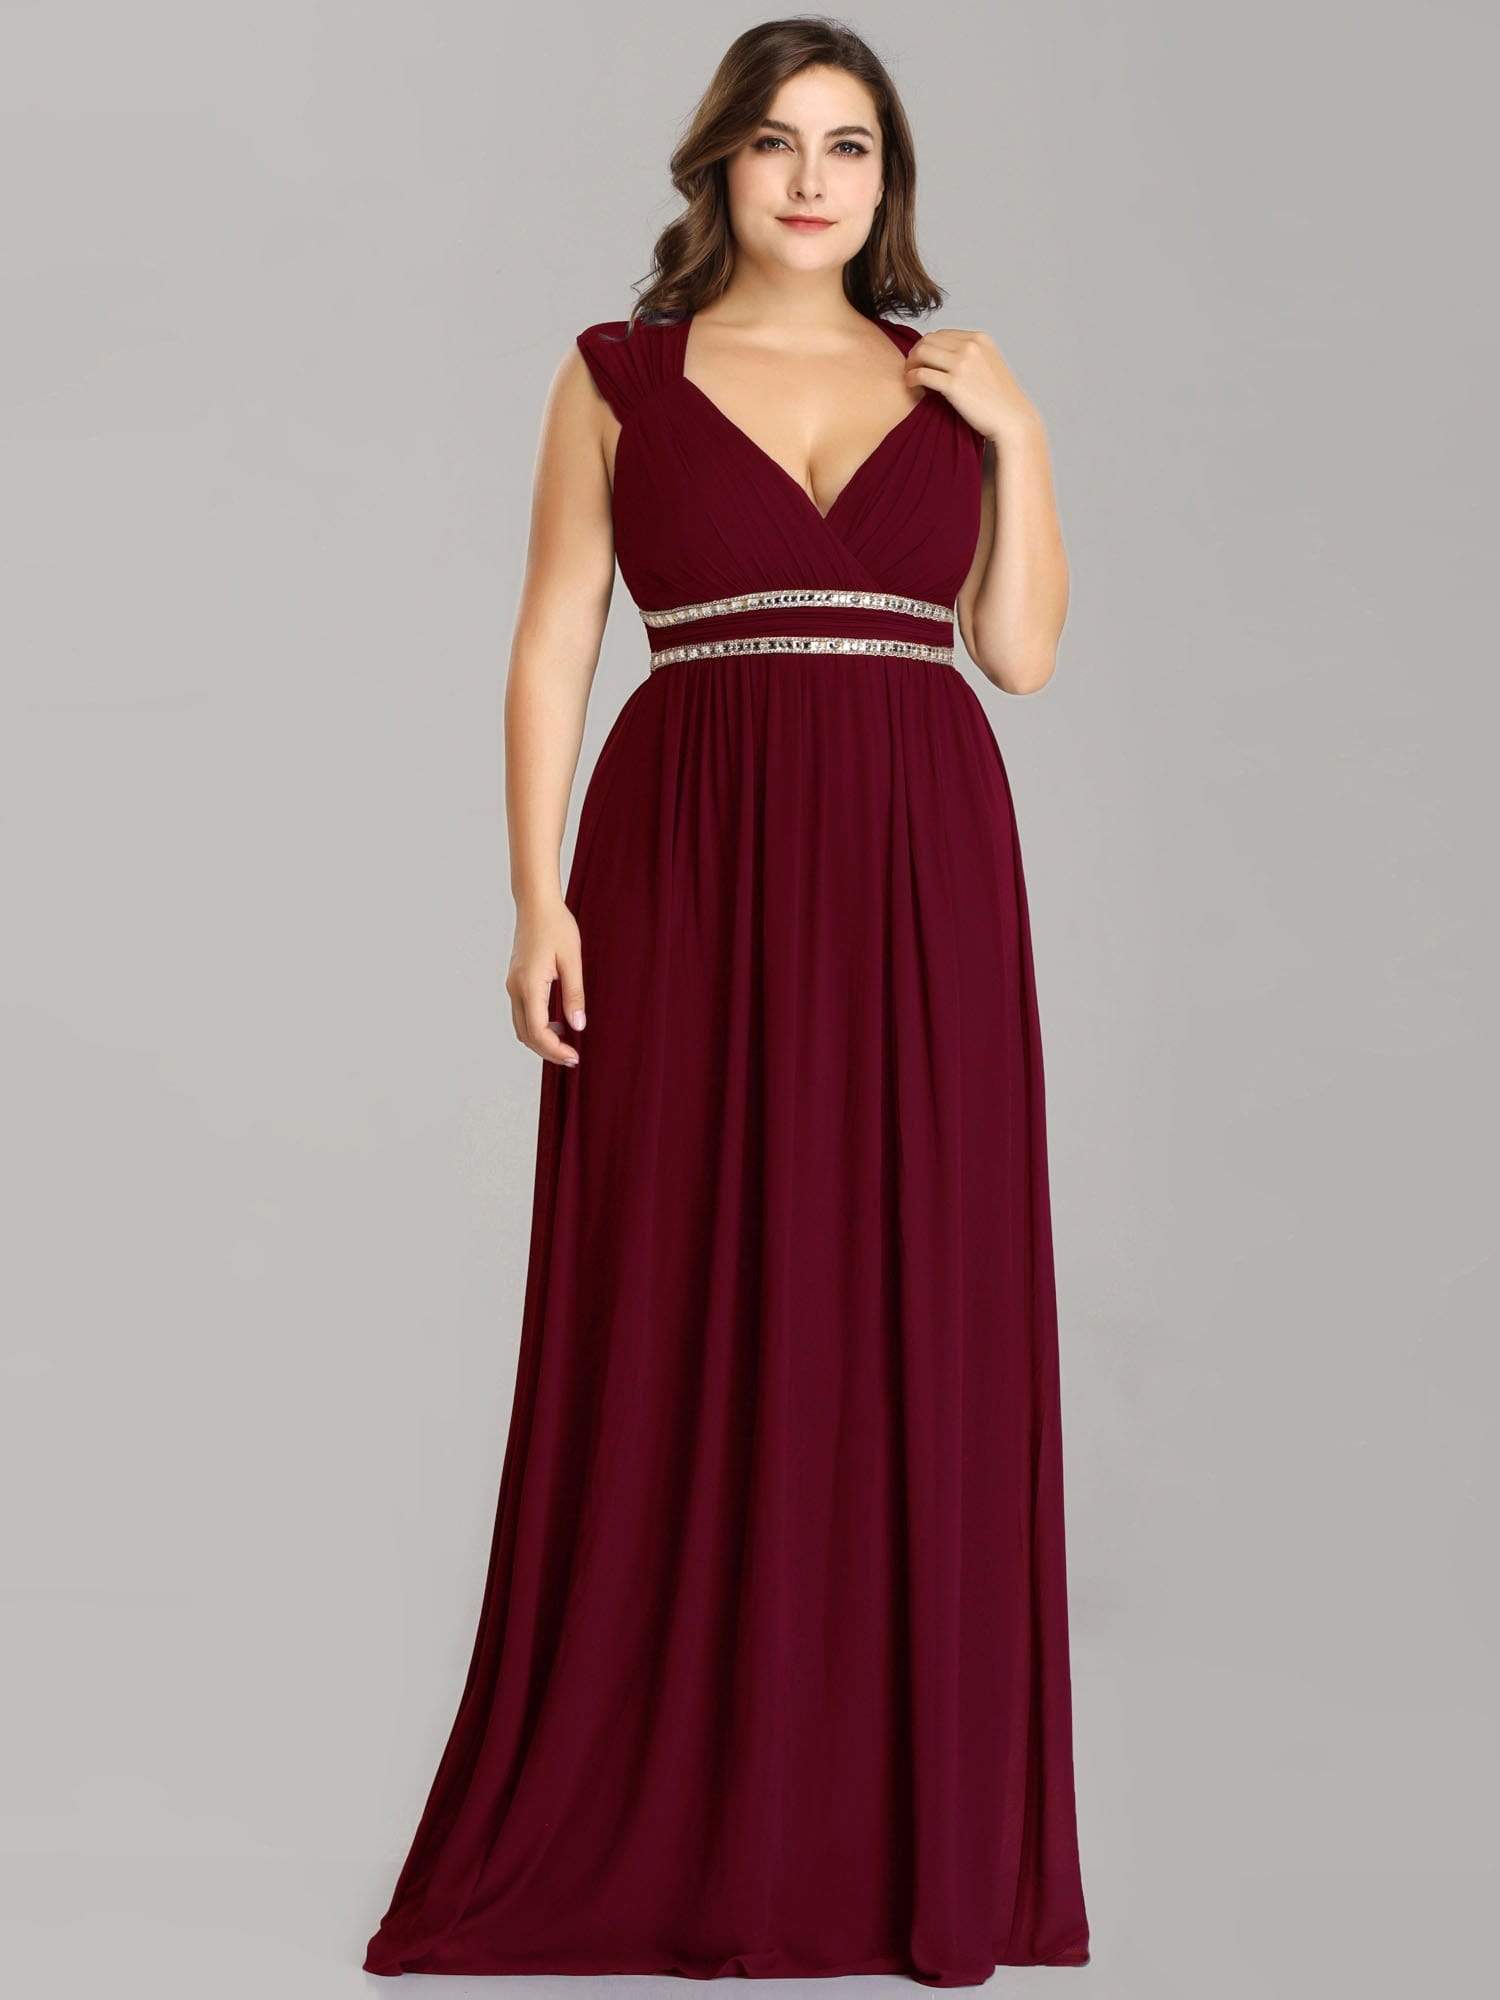 Evening Gowns Size Burgundy Bridesmaid